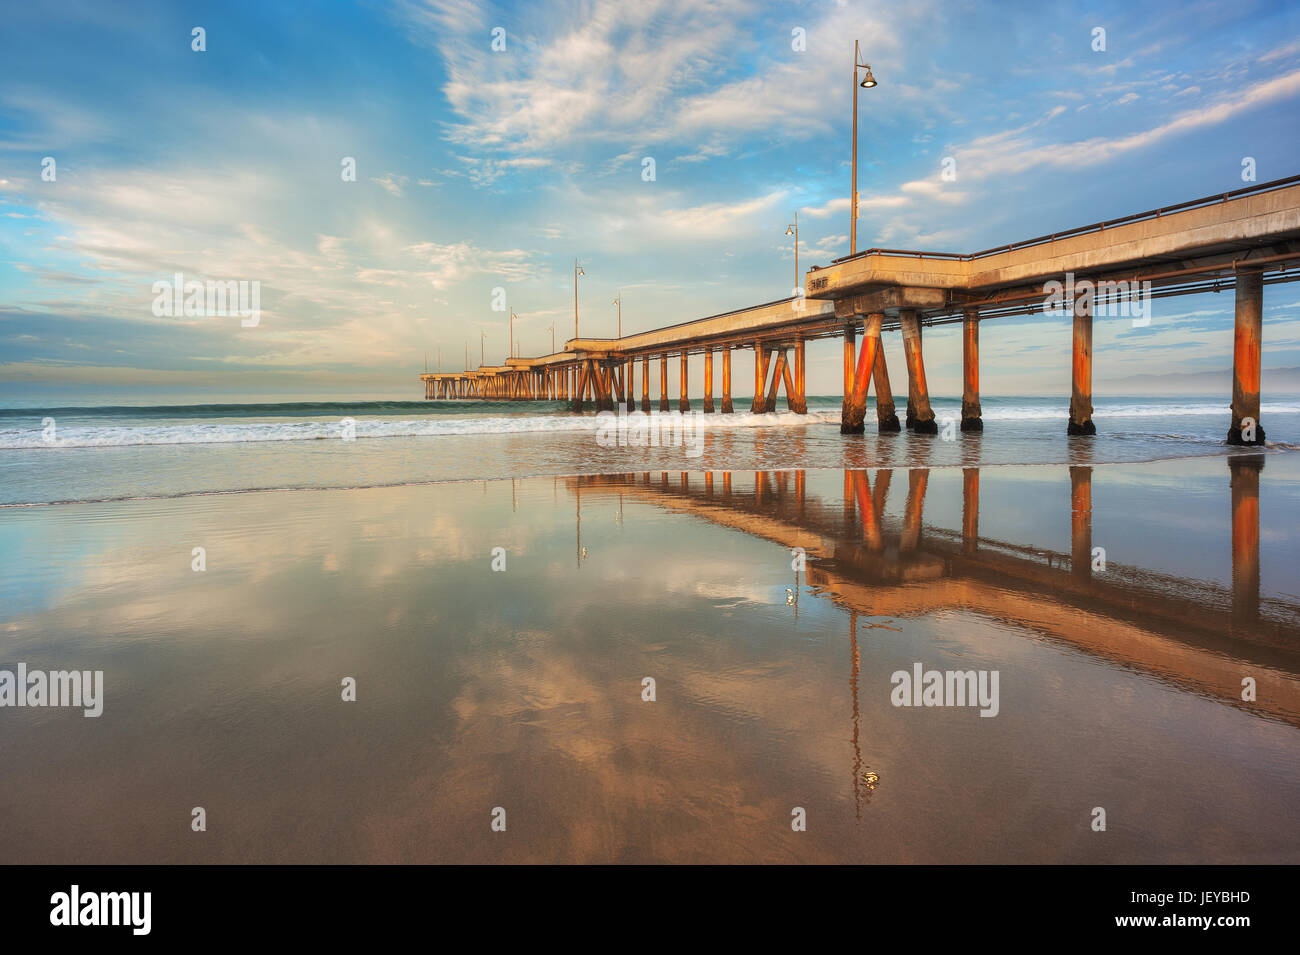 The iconic Venice Fishing Pier photographed after sunrise in Marina Del Rey, CA. Stock Photo